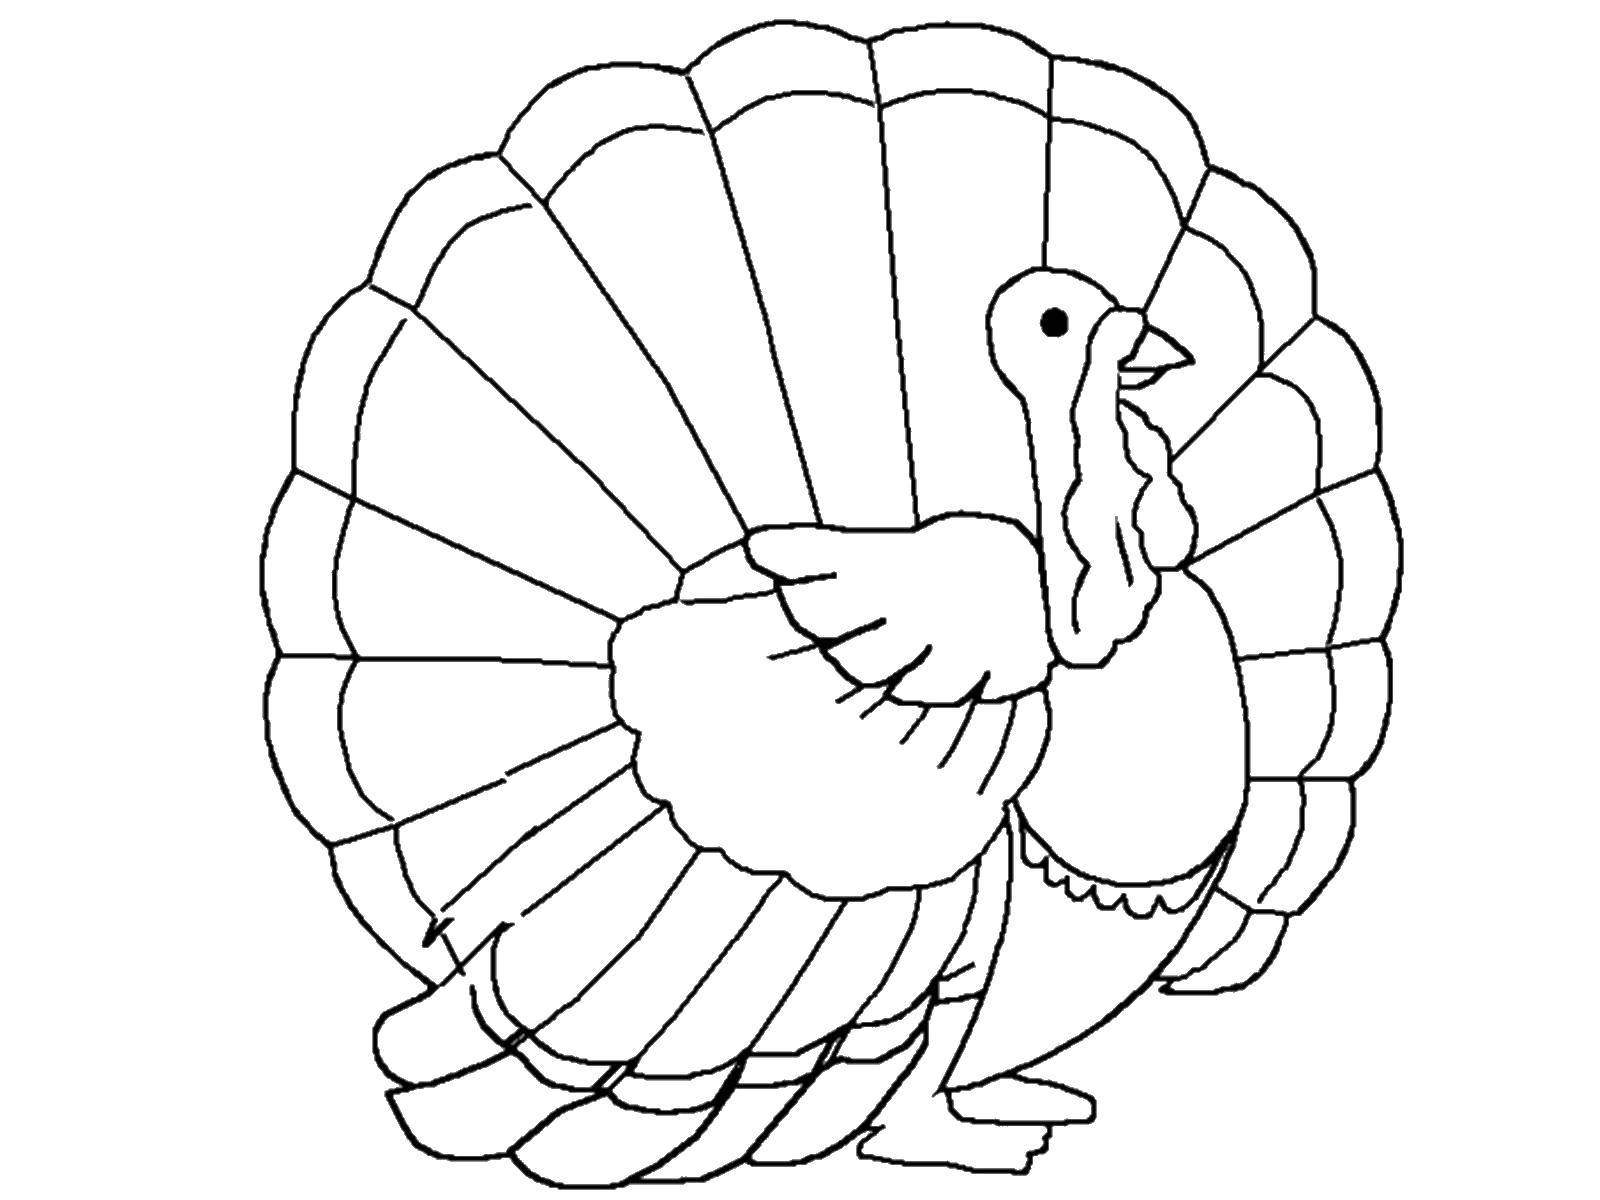 Coloring Turkey with a beautiful tail. Category Pets allowed. Tags:  Poultry, Turkey.